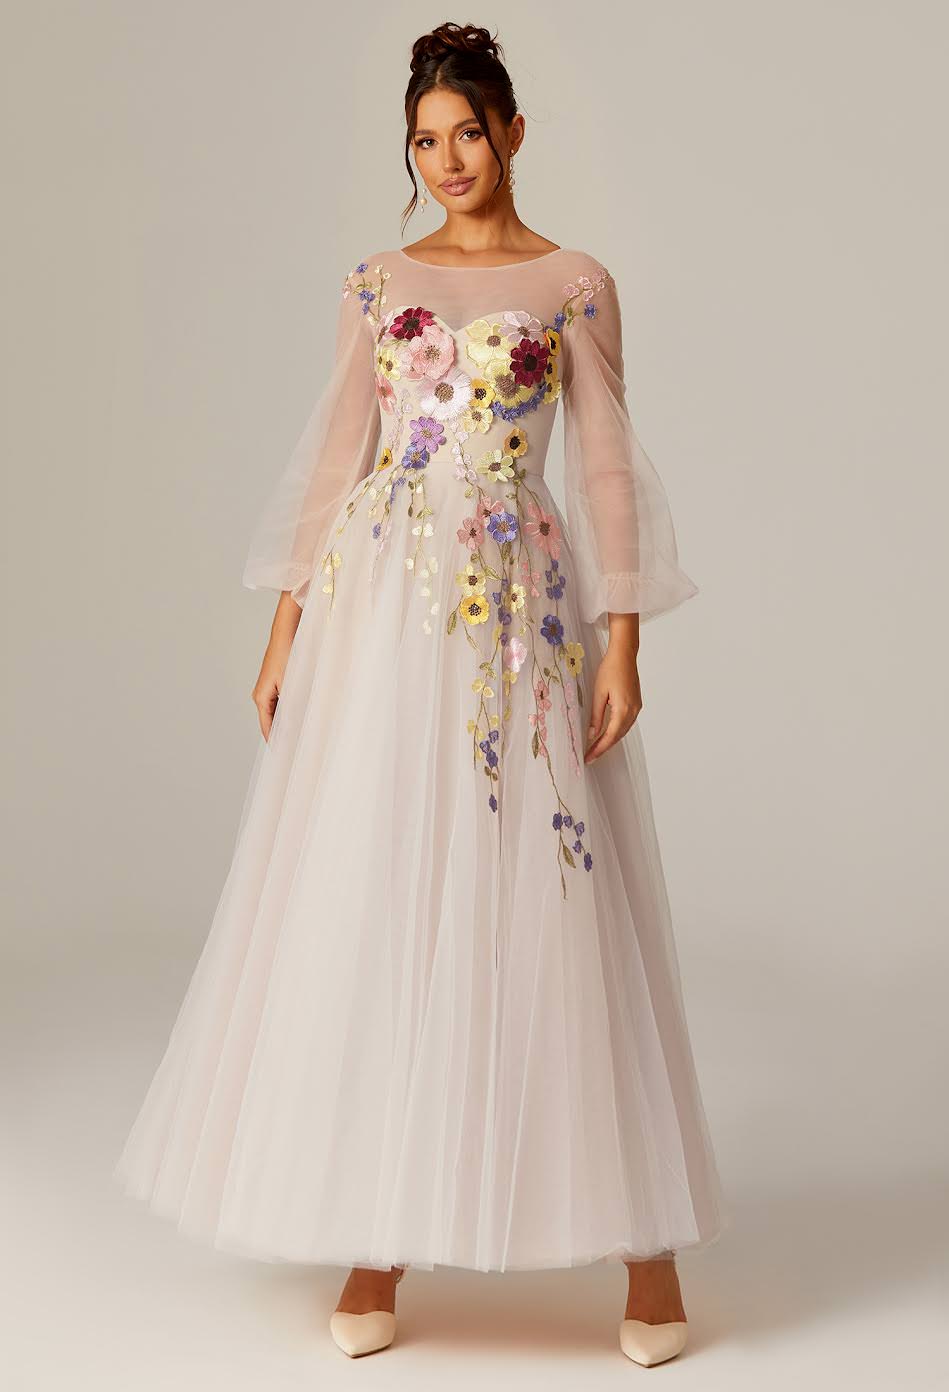 Gorgeous Floral wedding dress by AW Bridal